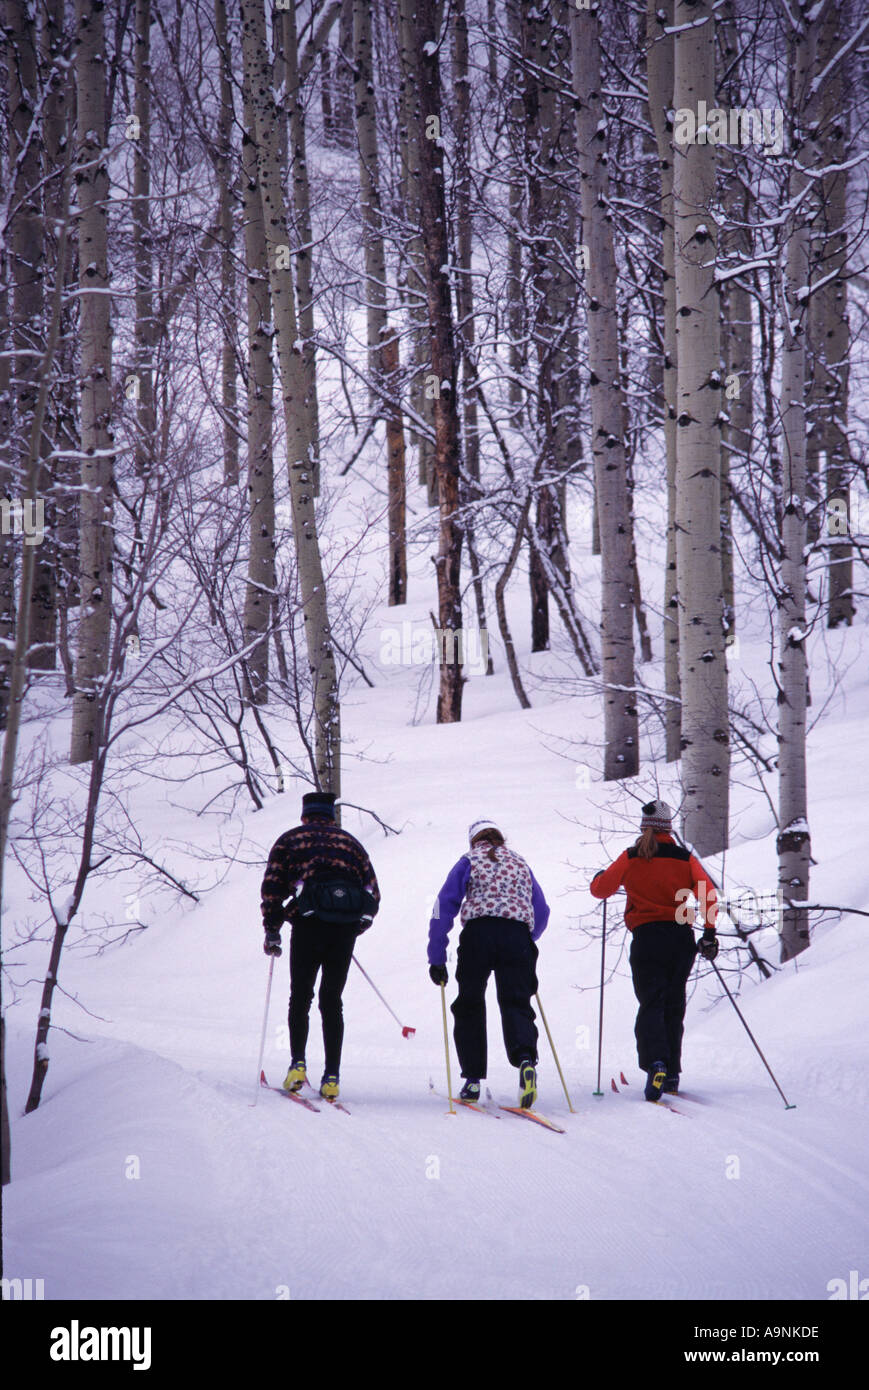 A group cross country skiing at Sundance UT Stock Photo